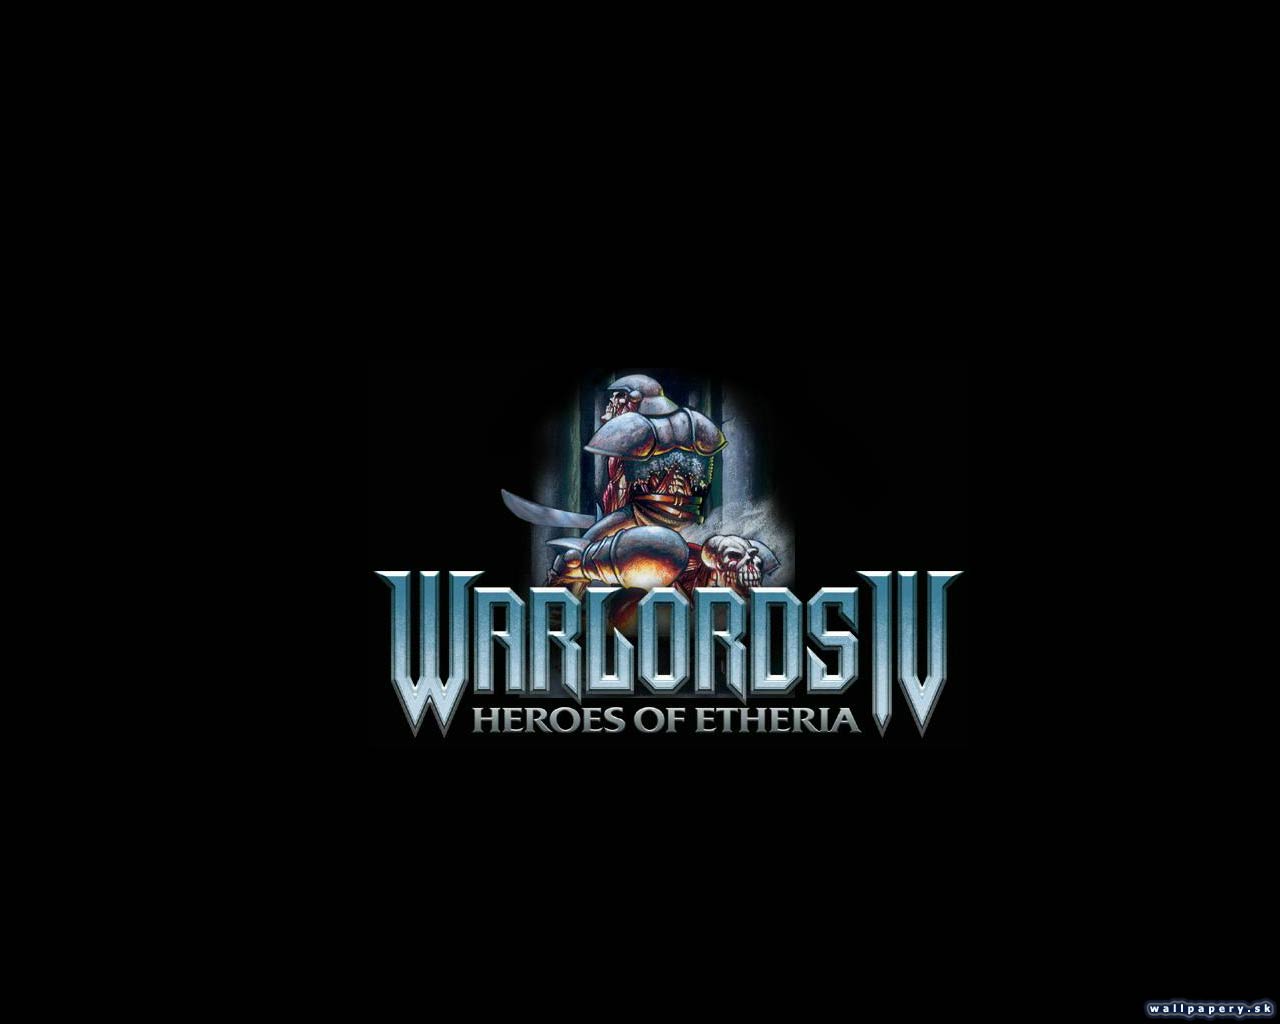 Warlords 4: Heroes of Etheria - wallpaper 12